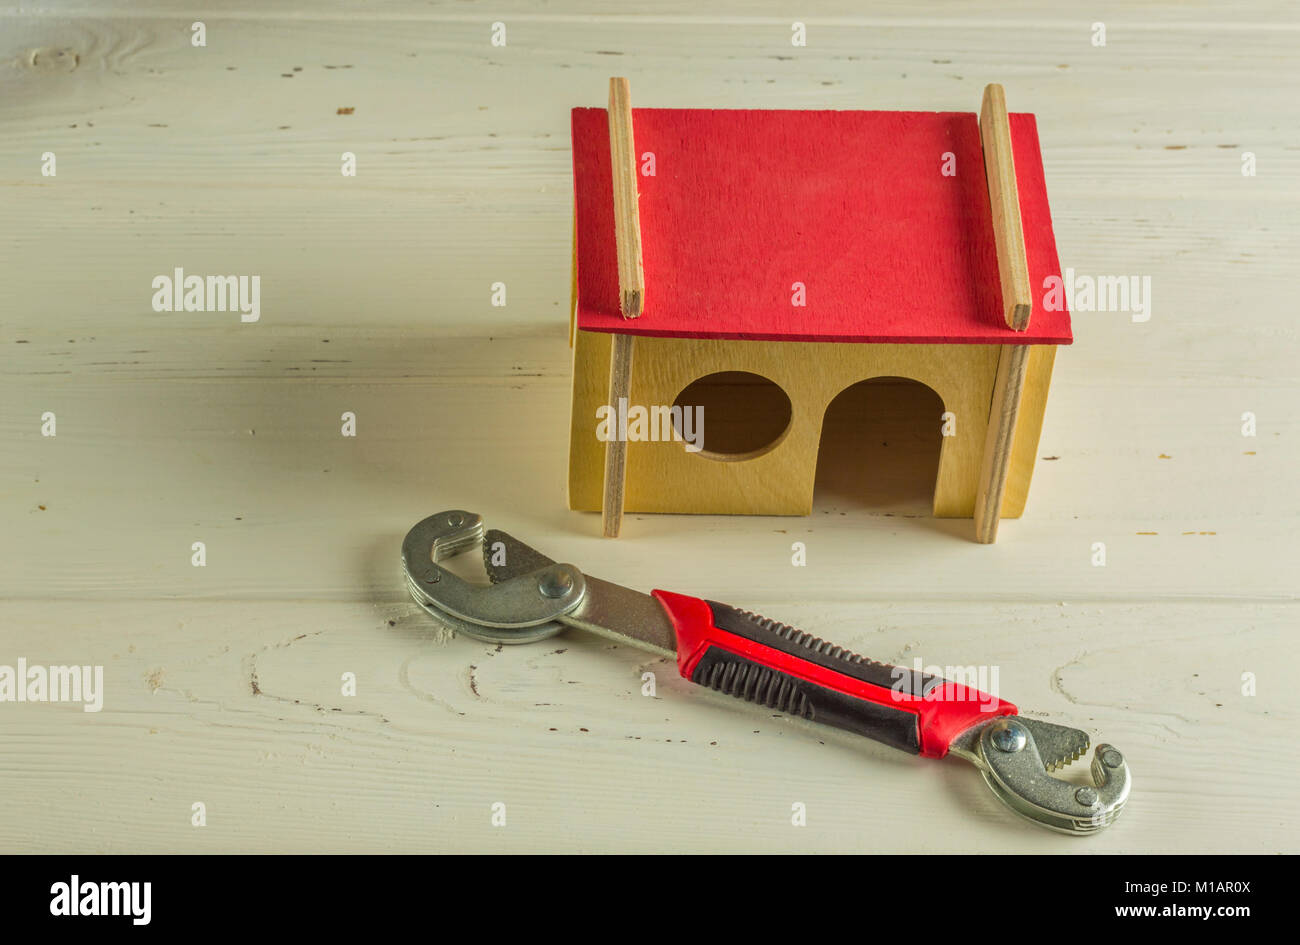 Monkey wrench and model house on wooden background Stock Photo